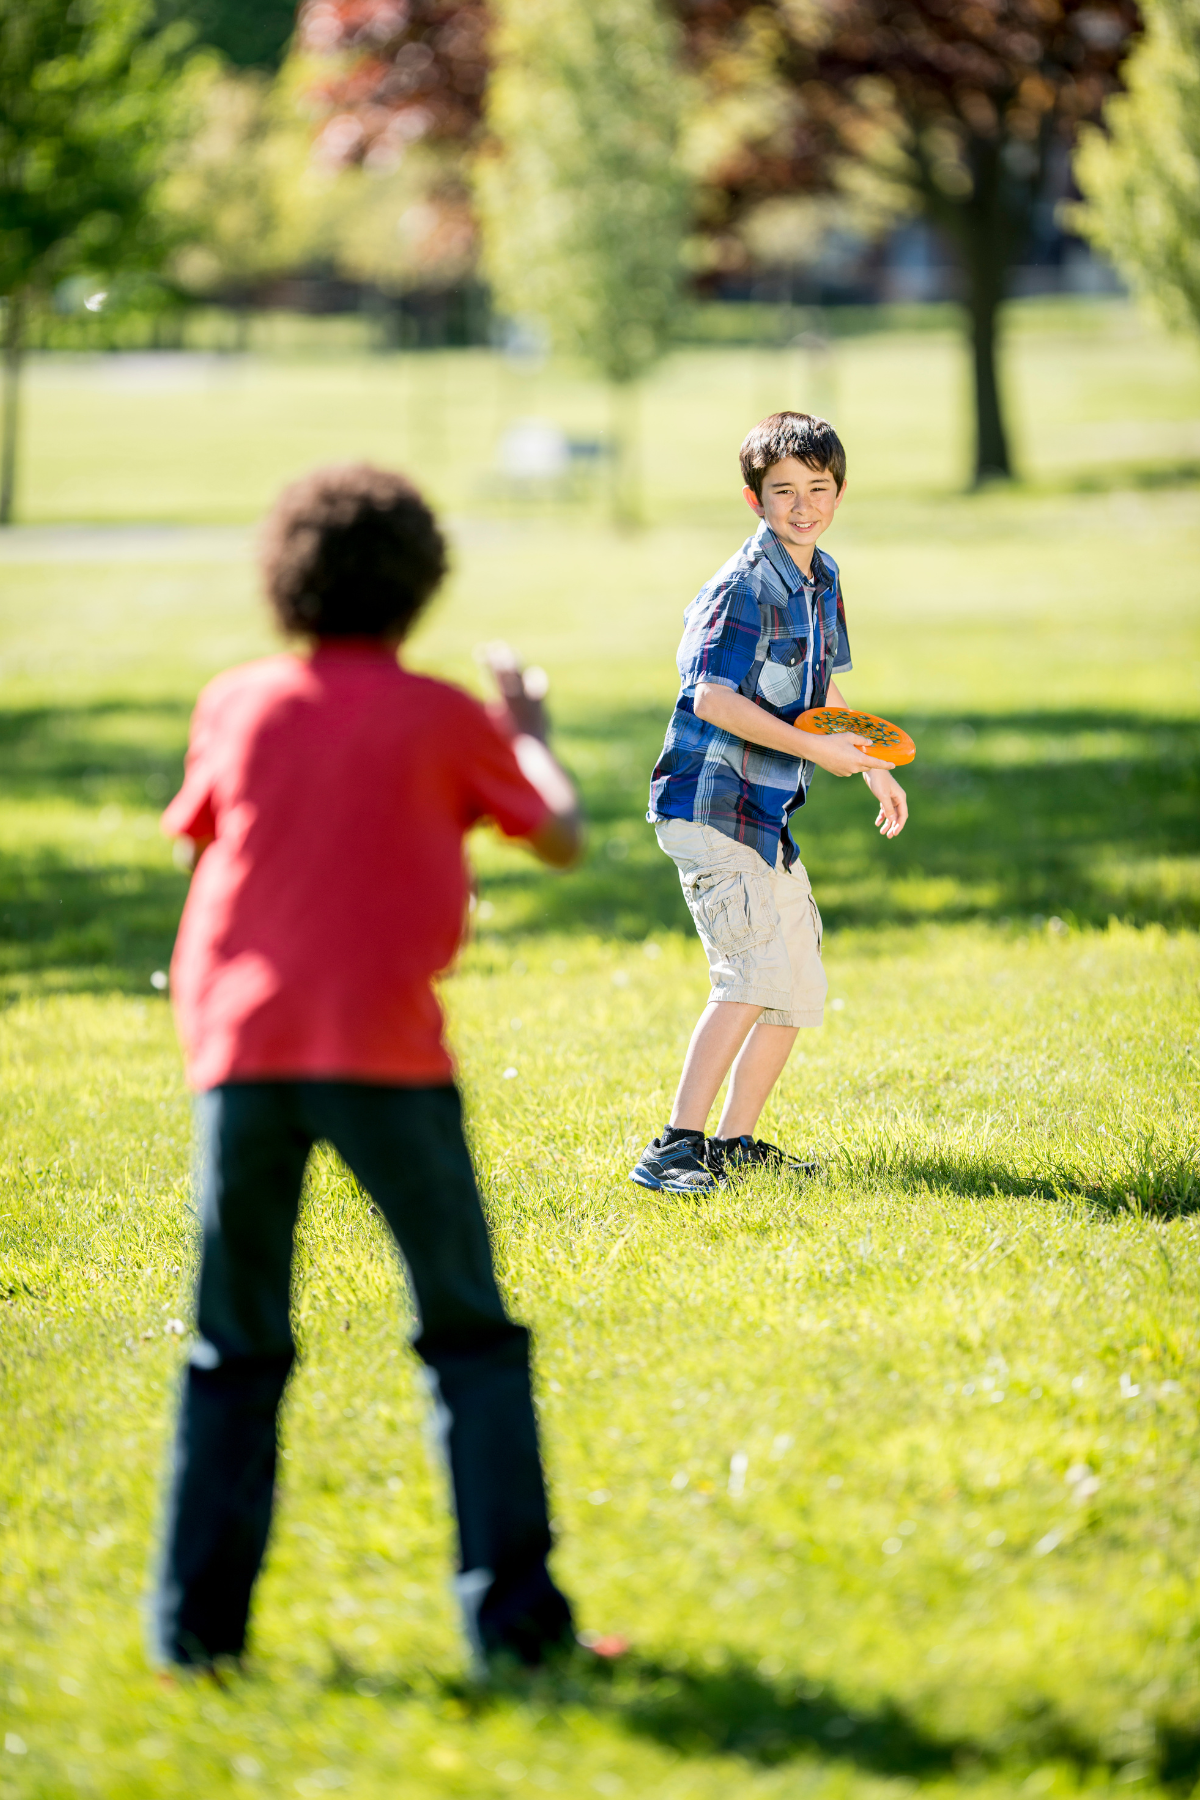 Boys playing frisbee at park